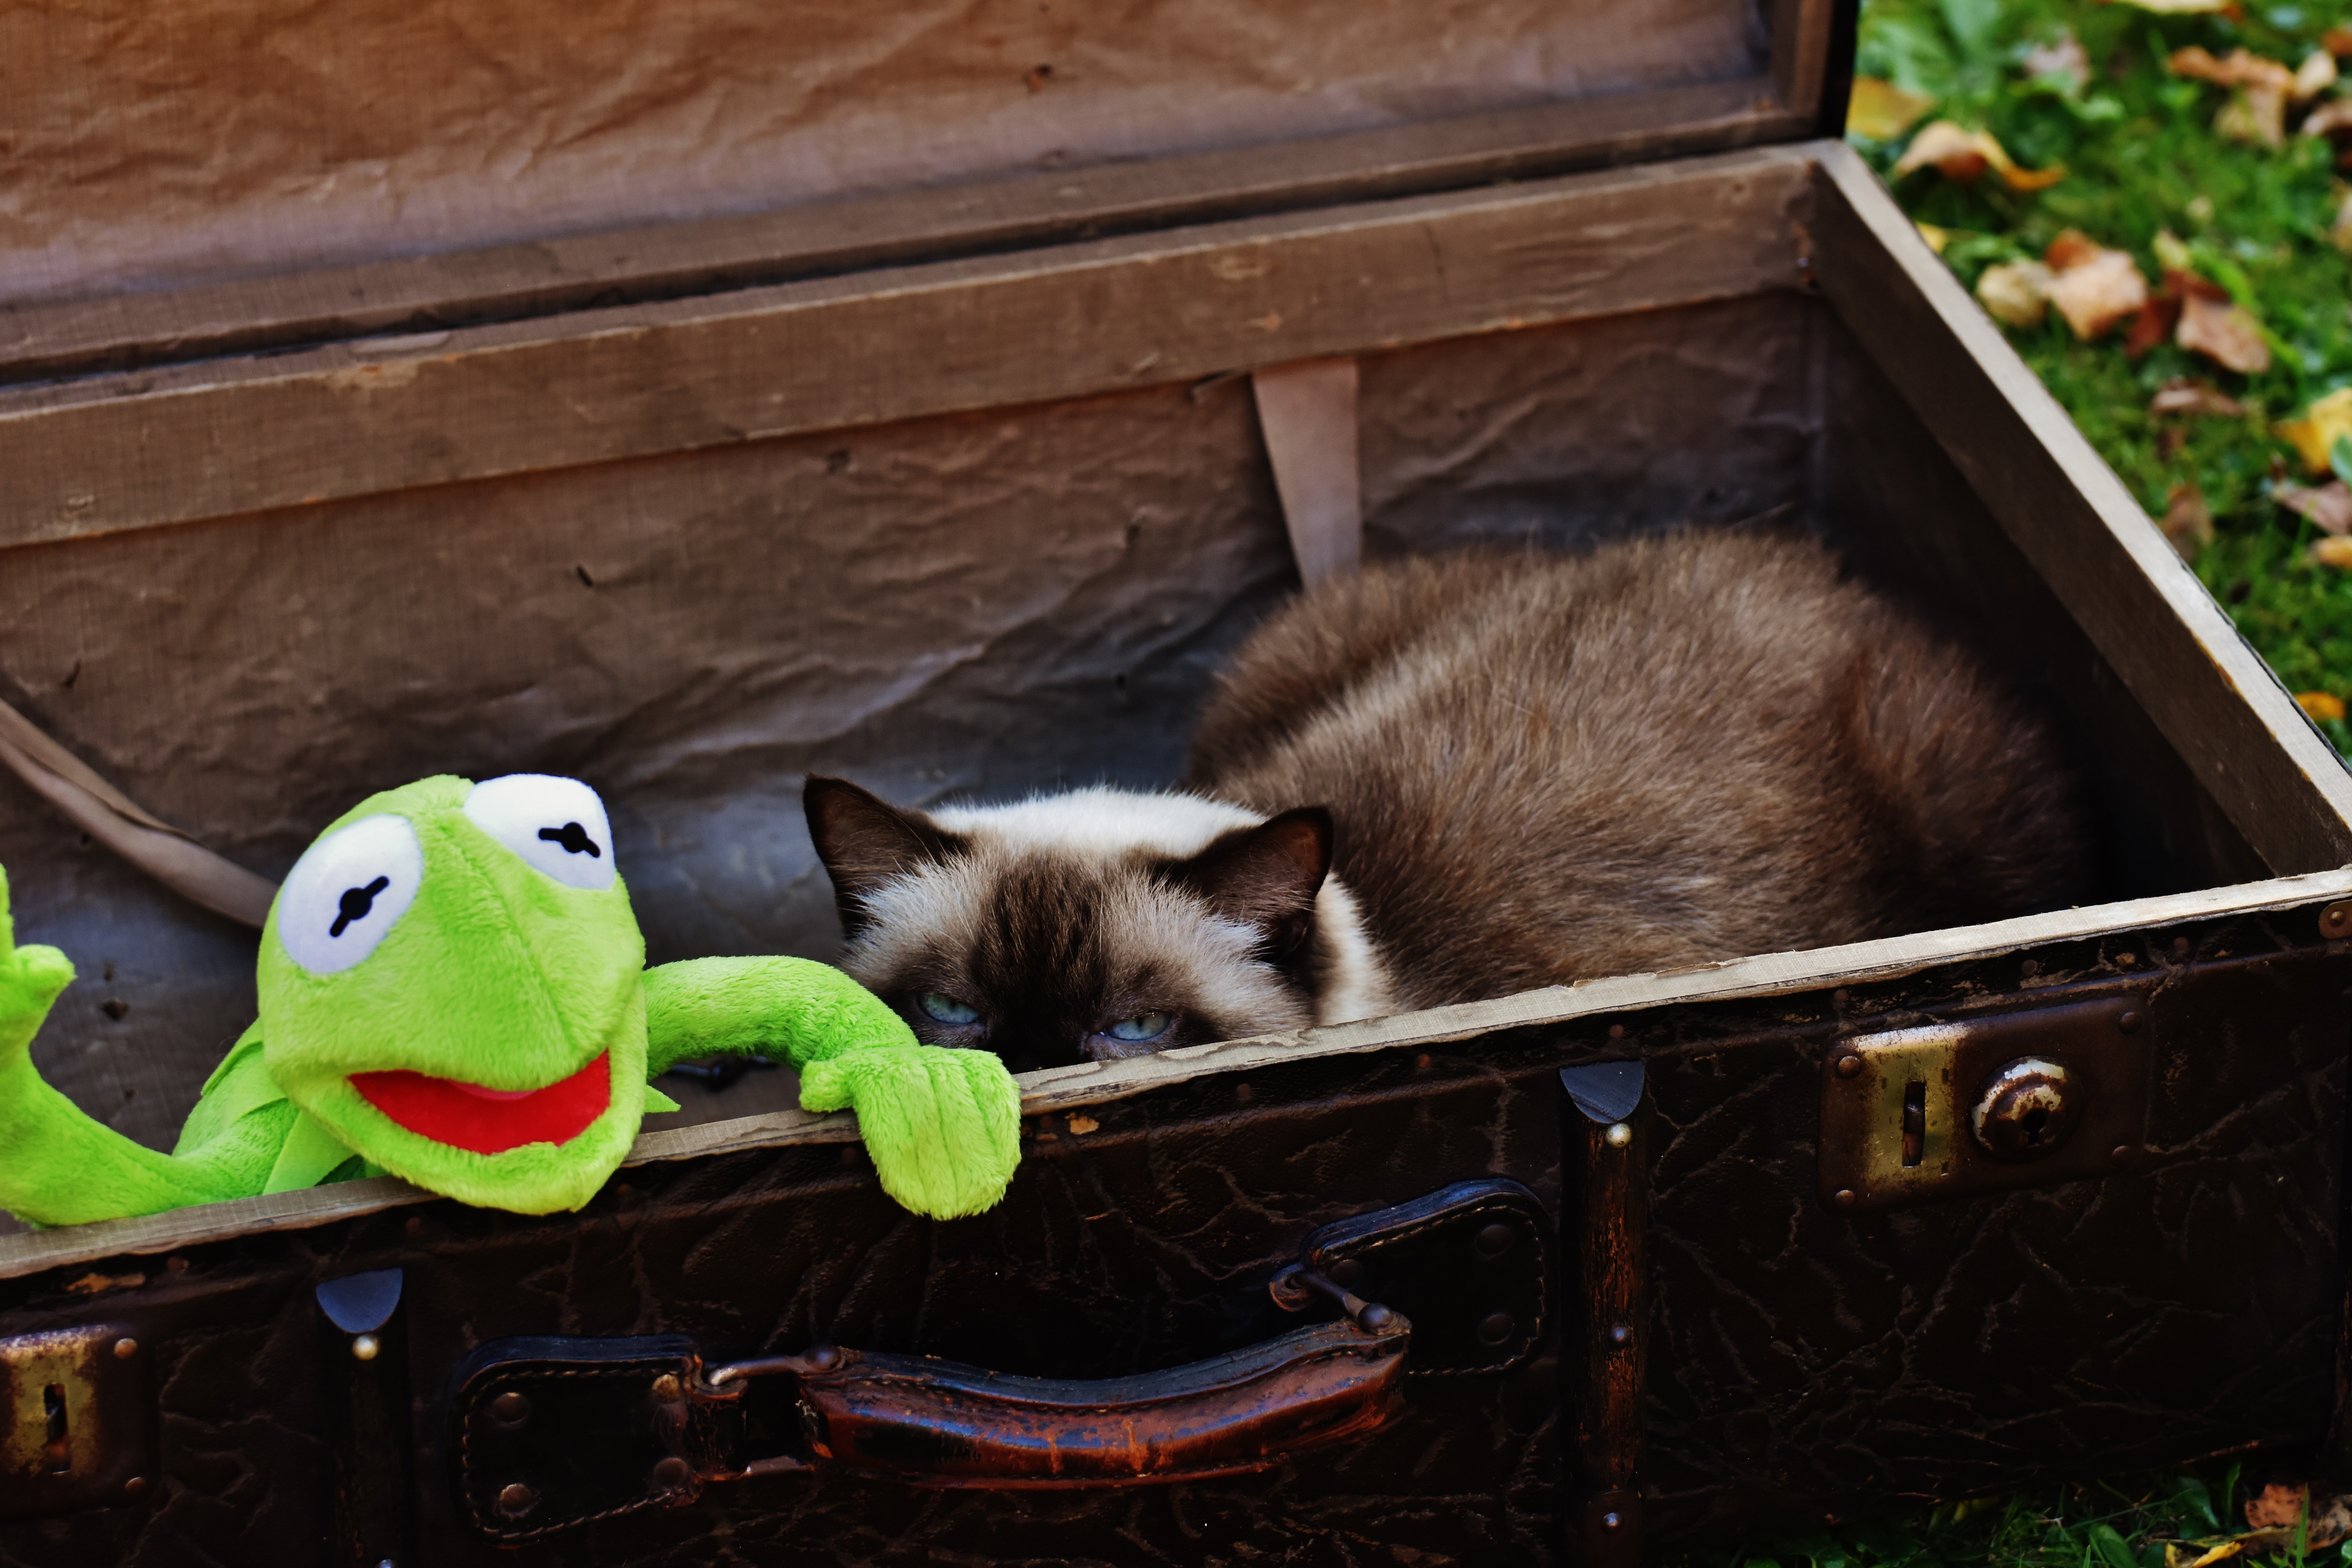 siamese cat and kermit the frog